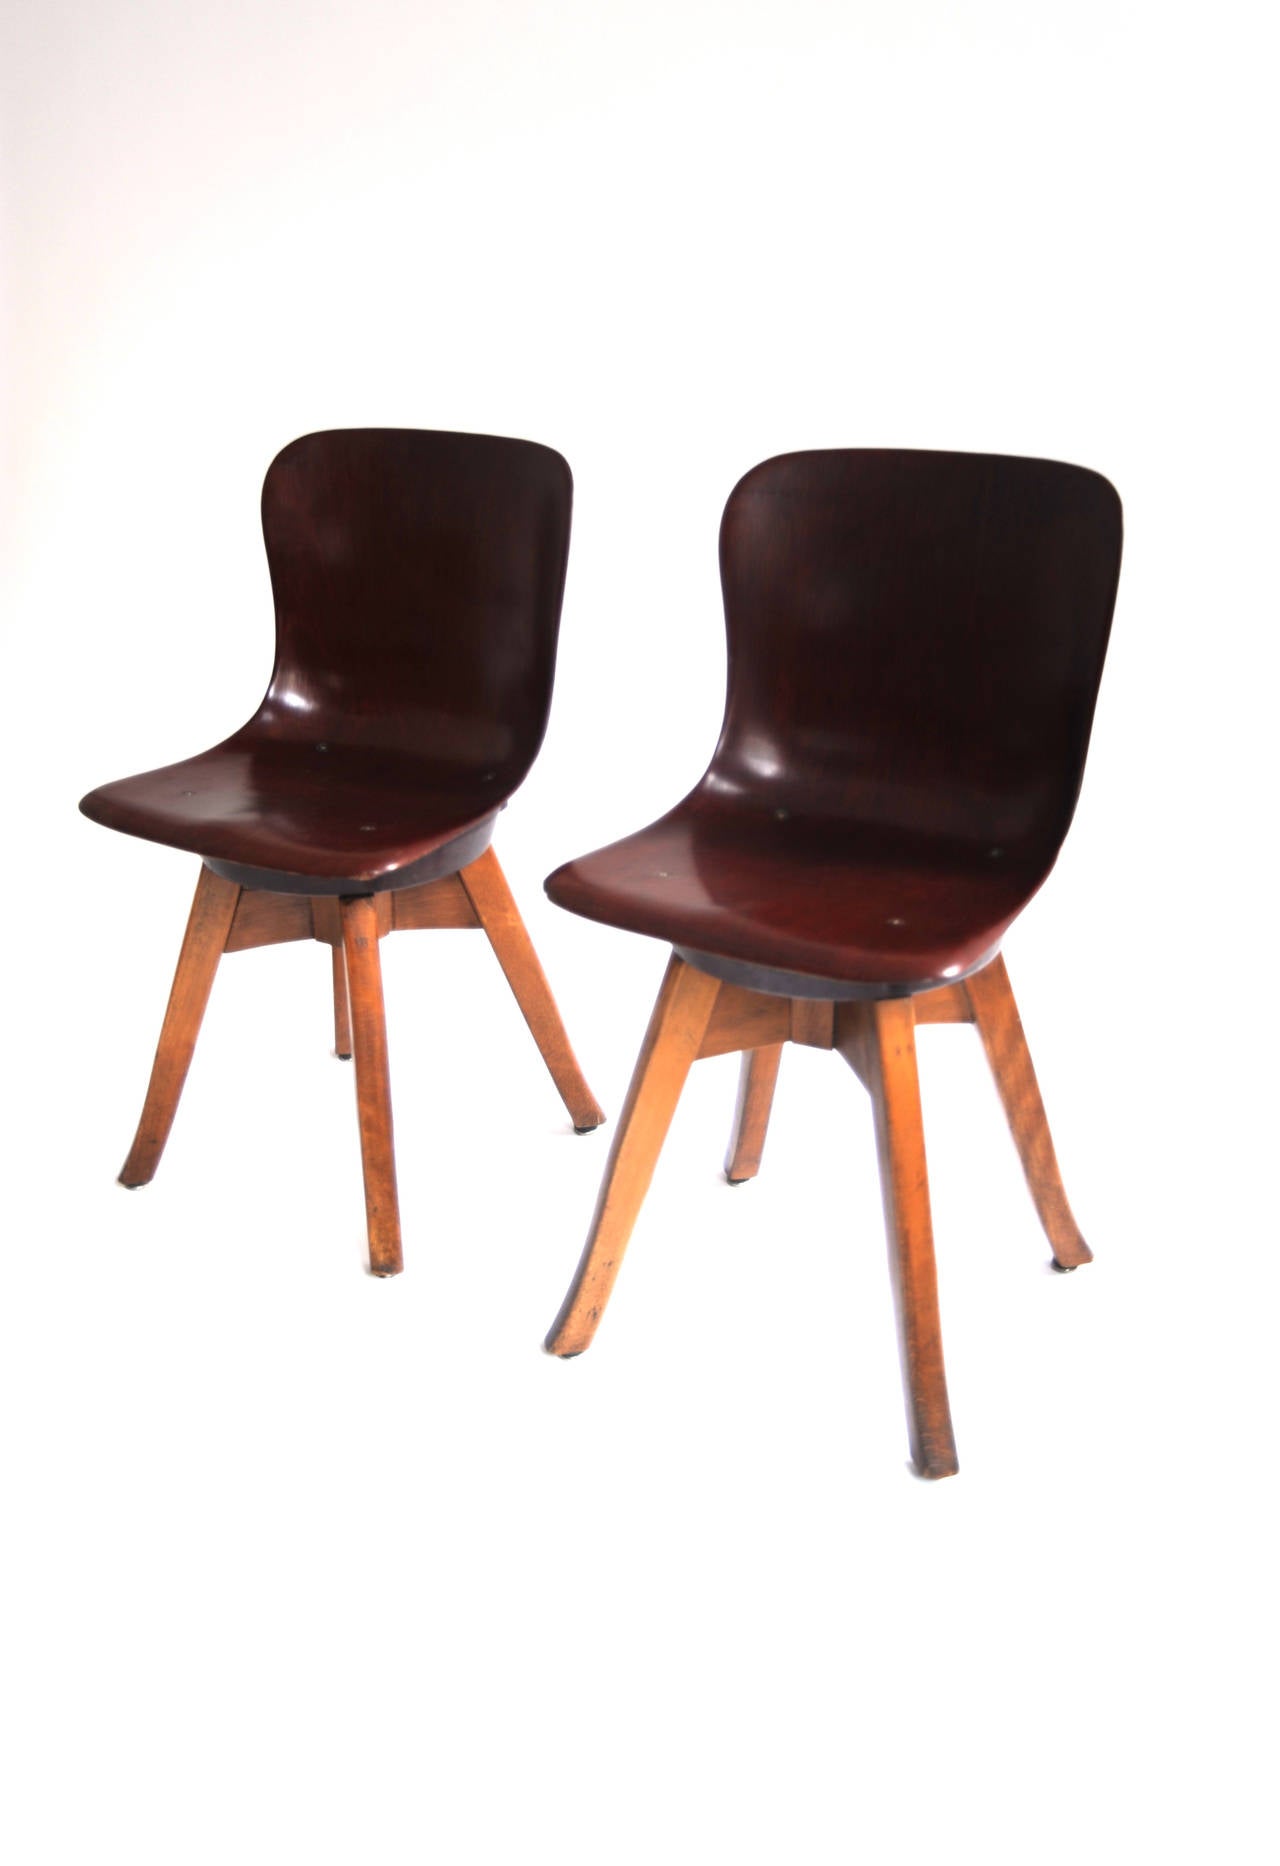 Adam Stegner.

Produced by Pagholz Flötotto.

Germany, circa 1960.

One-piece molded plywood seat, maple wood and mahogany color, impressed mark with company logo: 